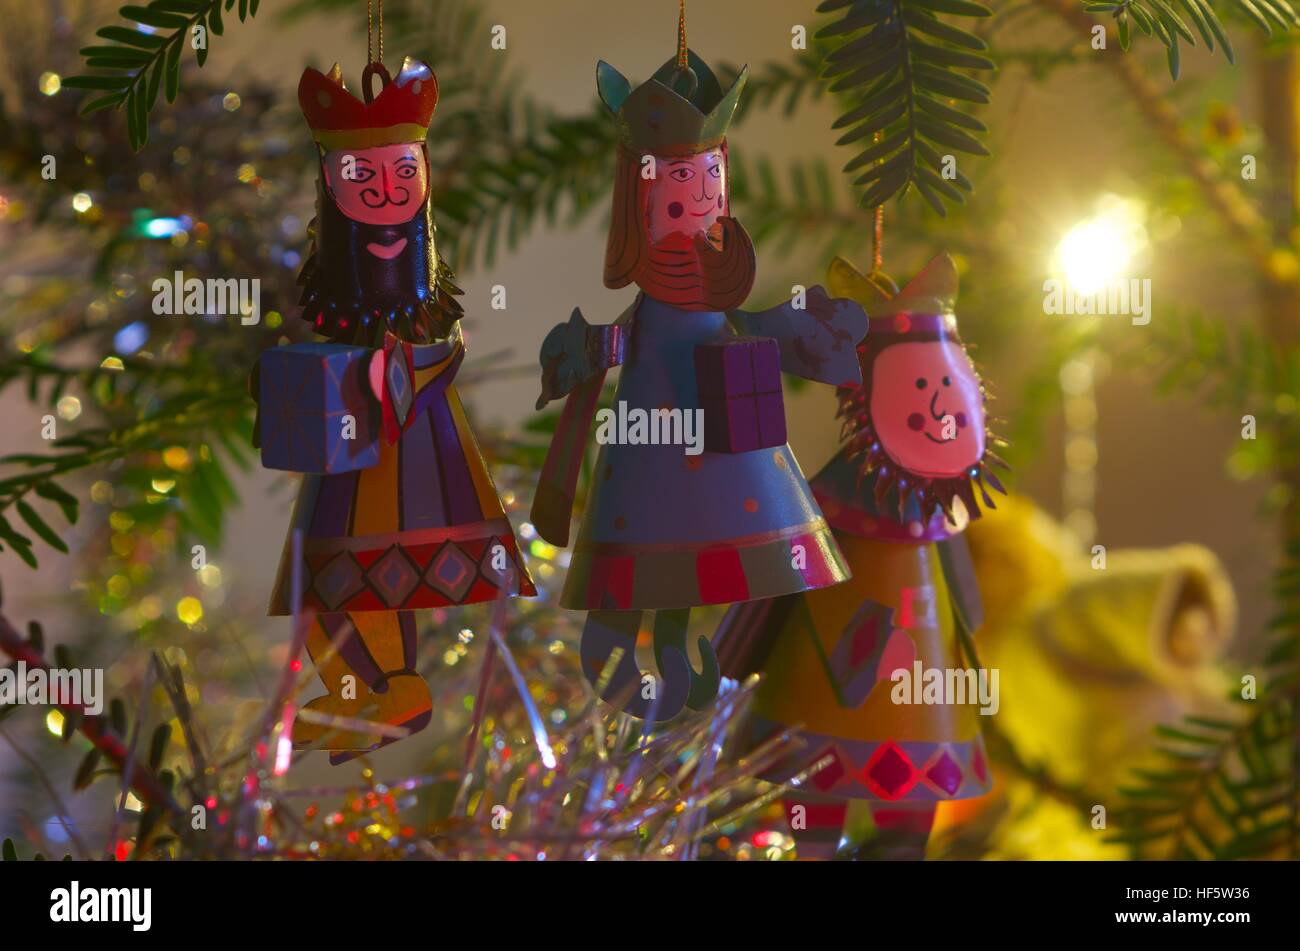 Three Kings Wise Men Decorations On A Christmas Tree Stock